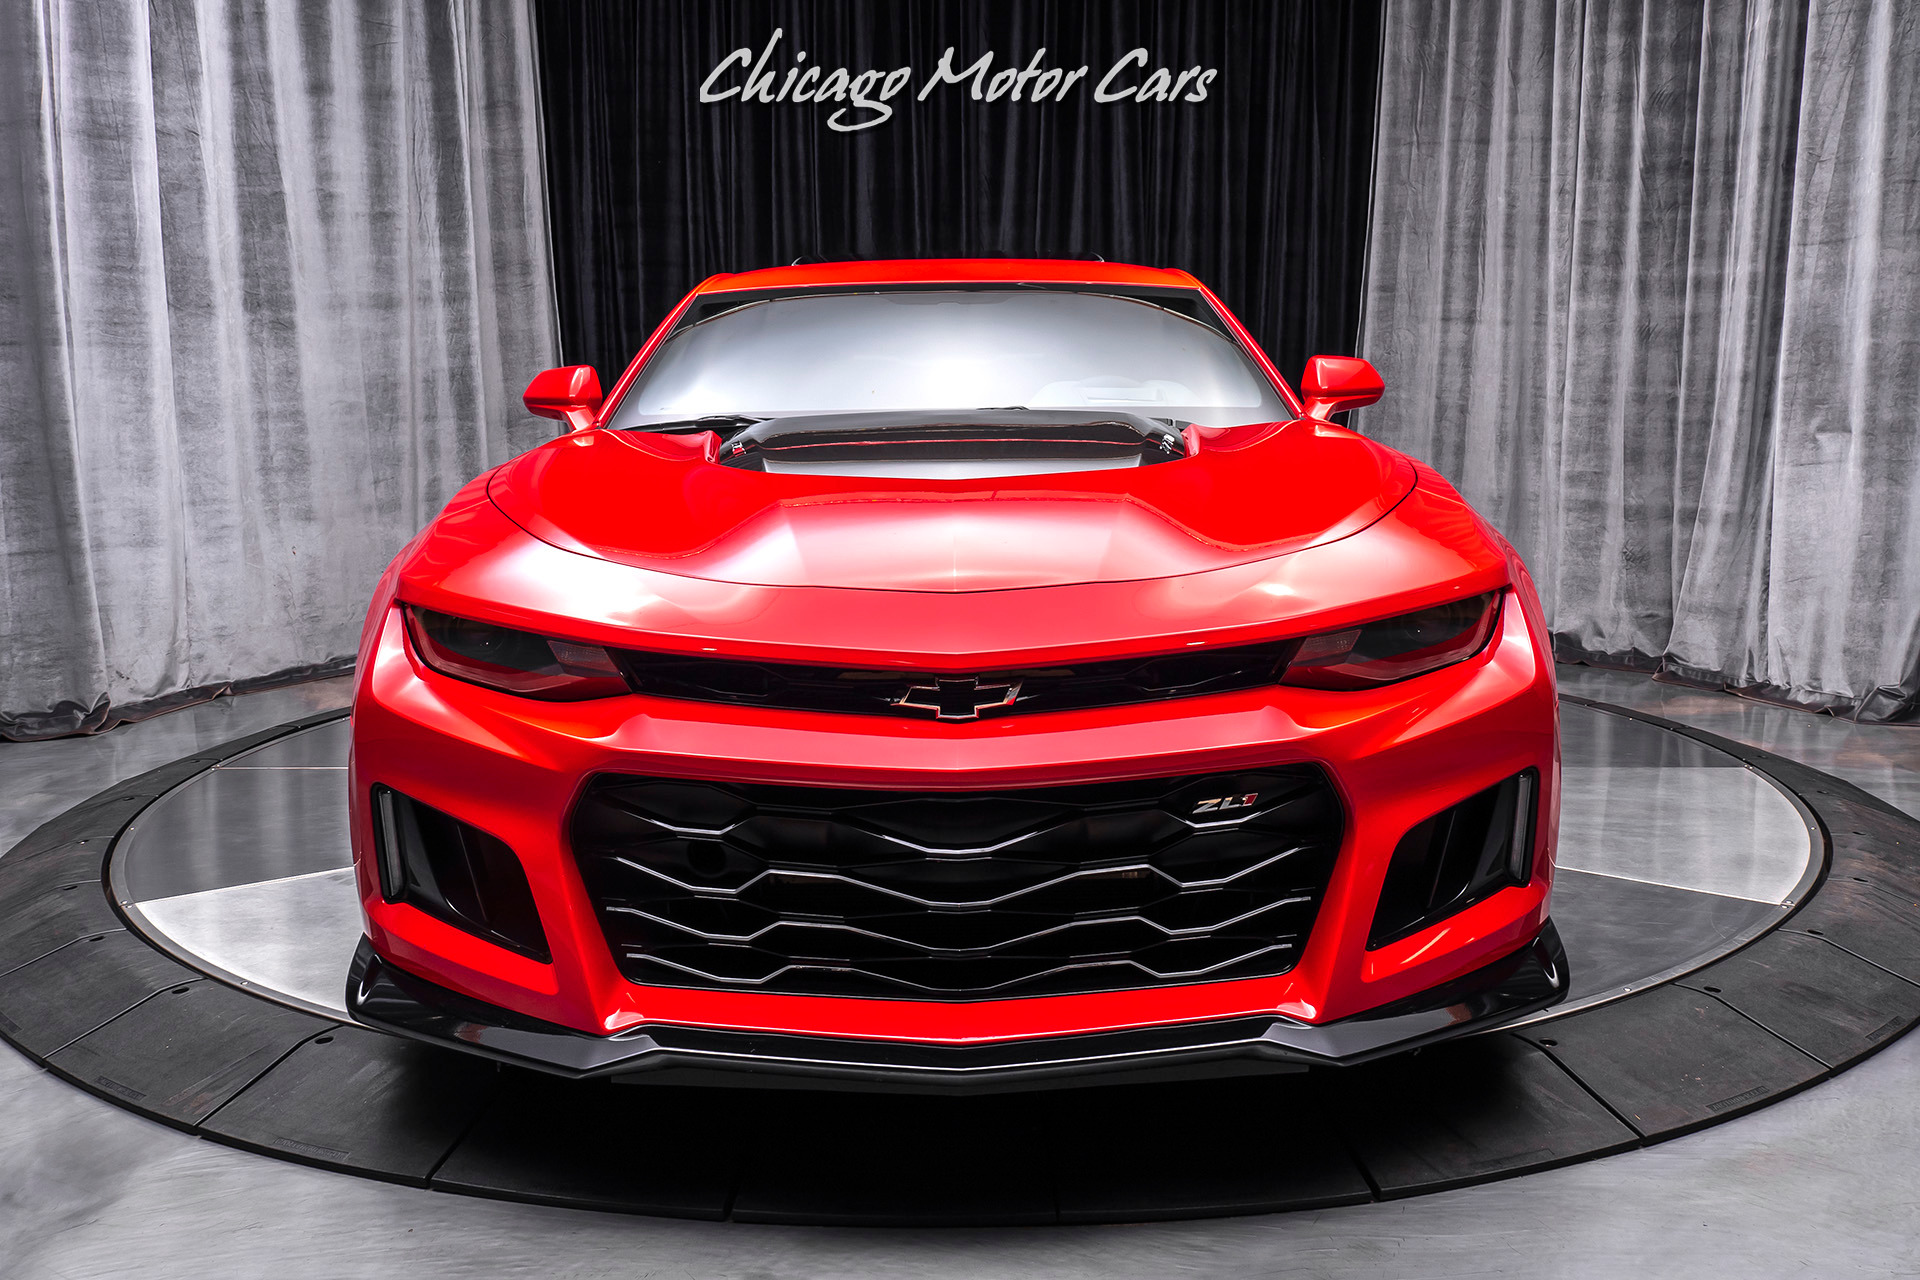 Used-2017-Chevrolet-Camaro-ZL1-Coupe-6-SPEED-MANUAL-PERFORMANCE-DATA-VIDEO-RECORDER-ONLY-7K-MILES